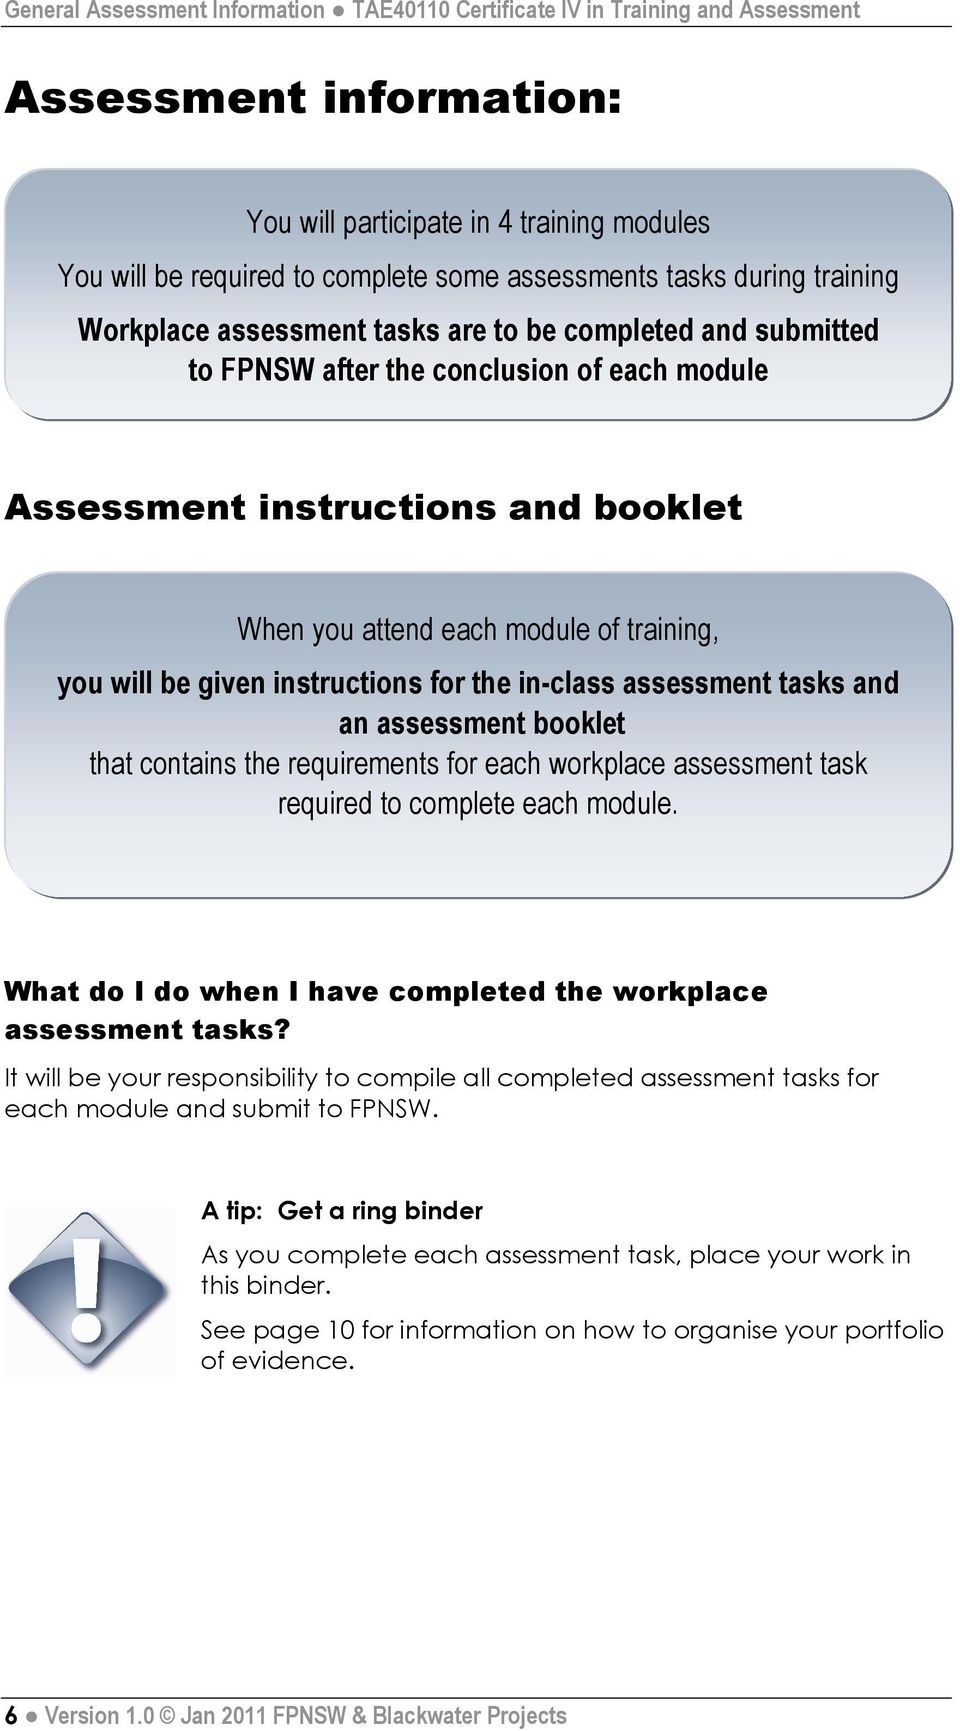 training, you will be given instructions for the in-class assessment tasks and an assessment booklet that contains the requirements for each workplace assessment task required to complete each module.